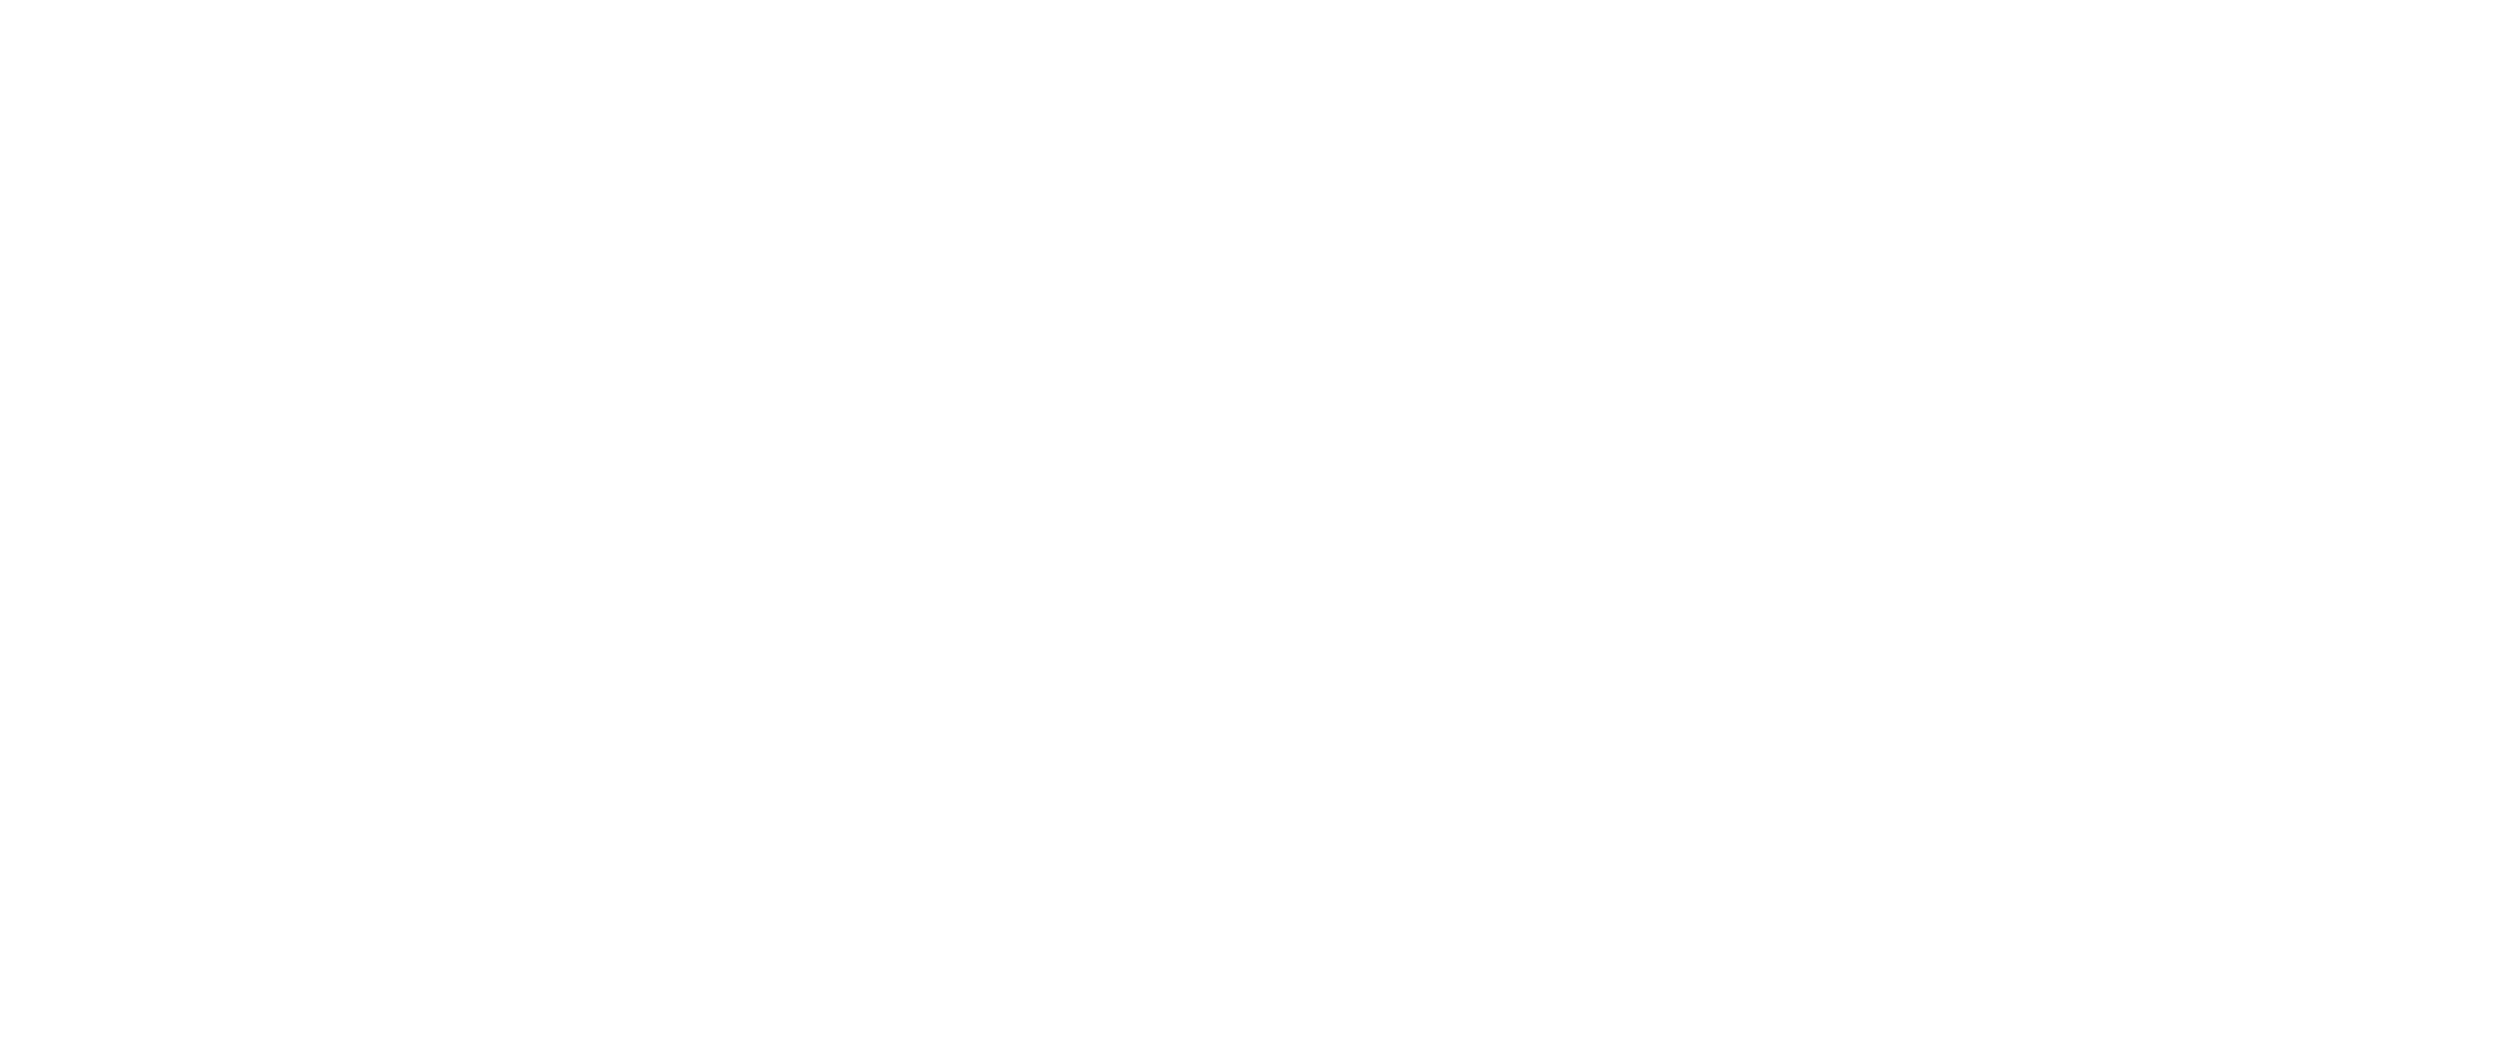 IronCraft_EnclosedMark_attached_2tone_white.png